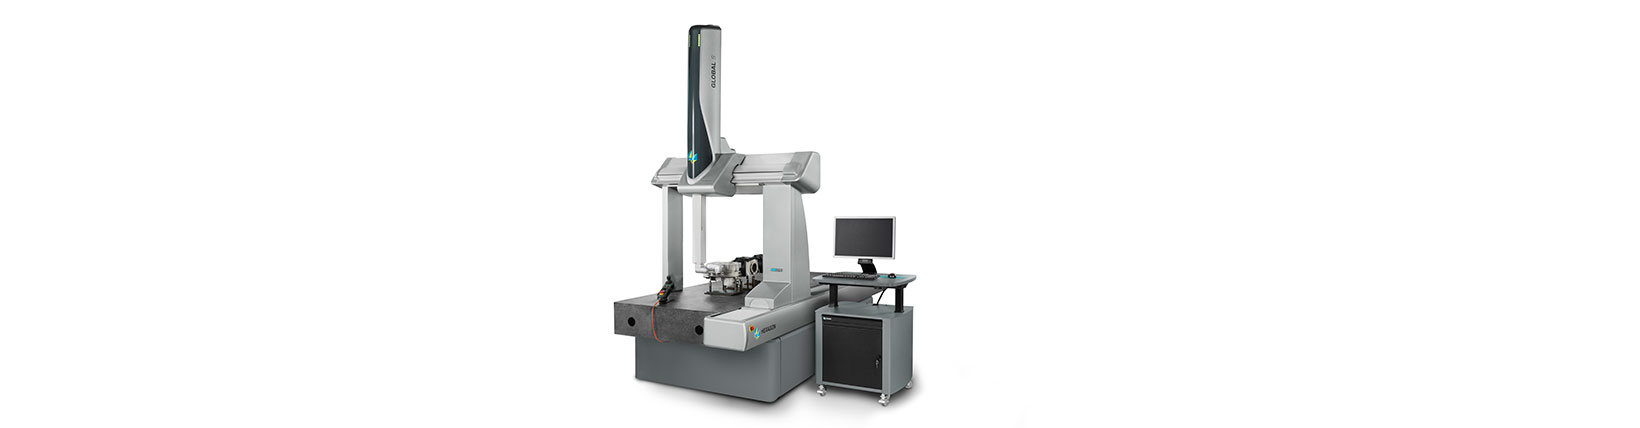 A coordinate measuring machine on a white background with a computer monitor next to it